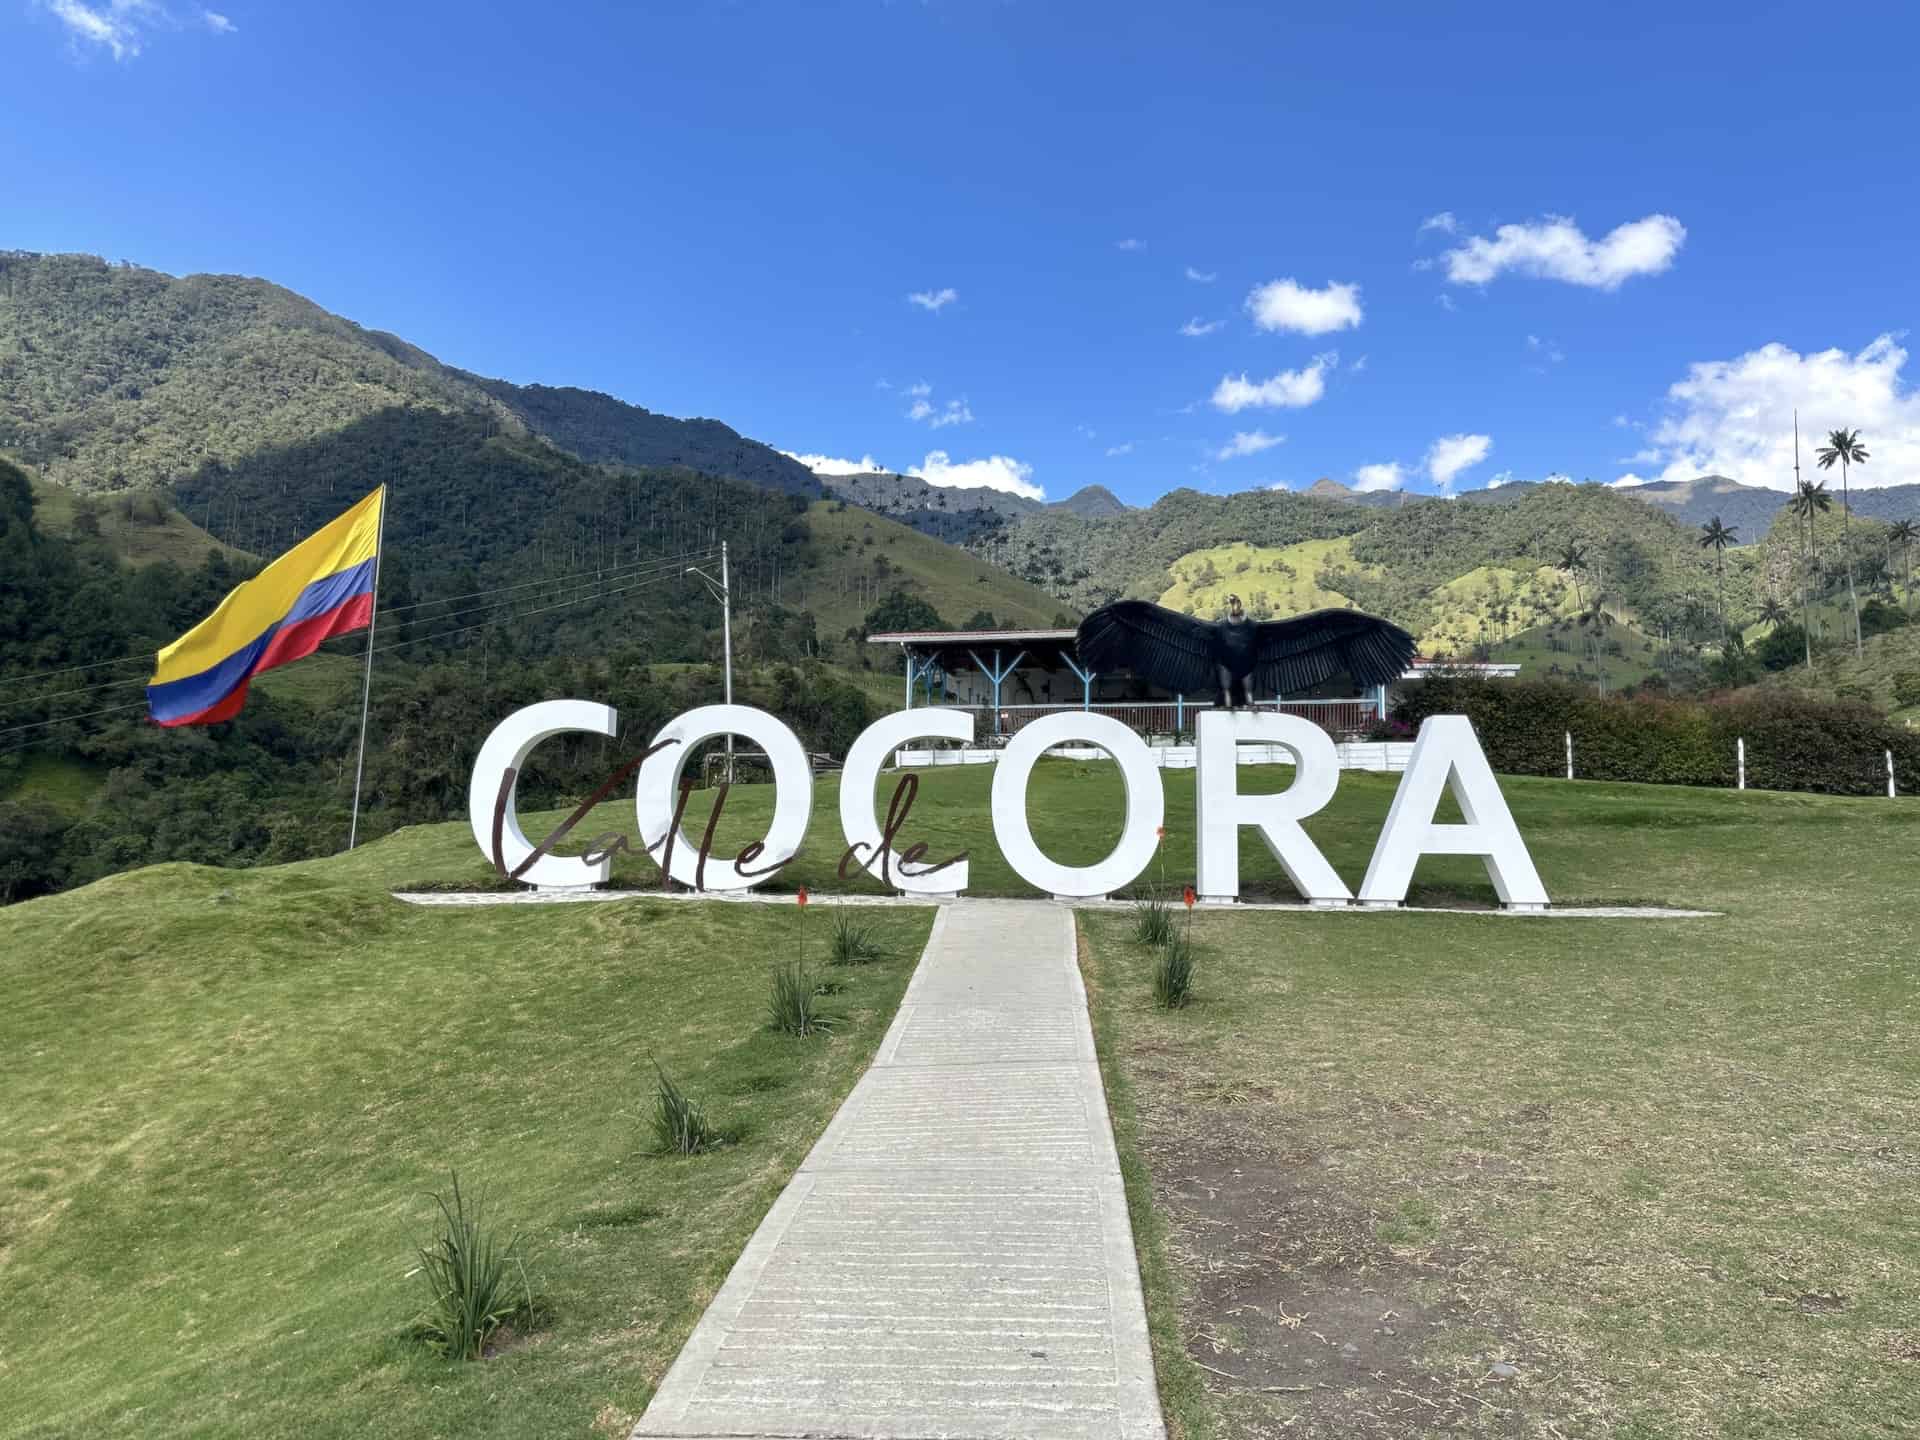 Cocora sign at the Palm Forest at Cocora Valley in Quindío, Colombia